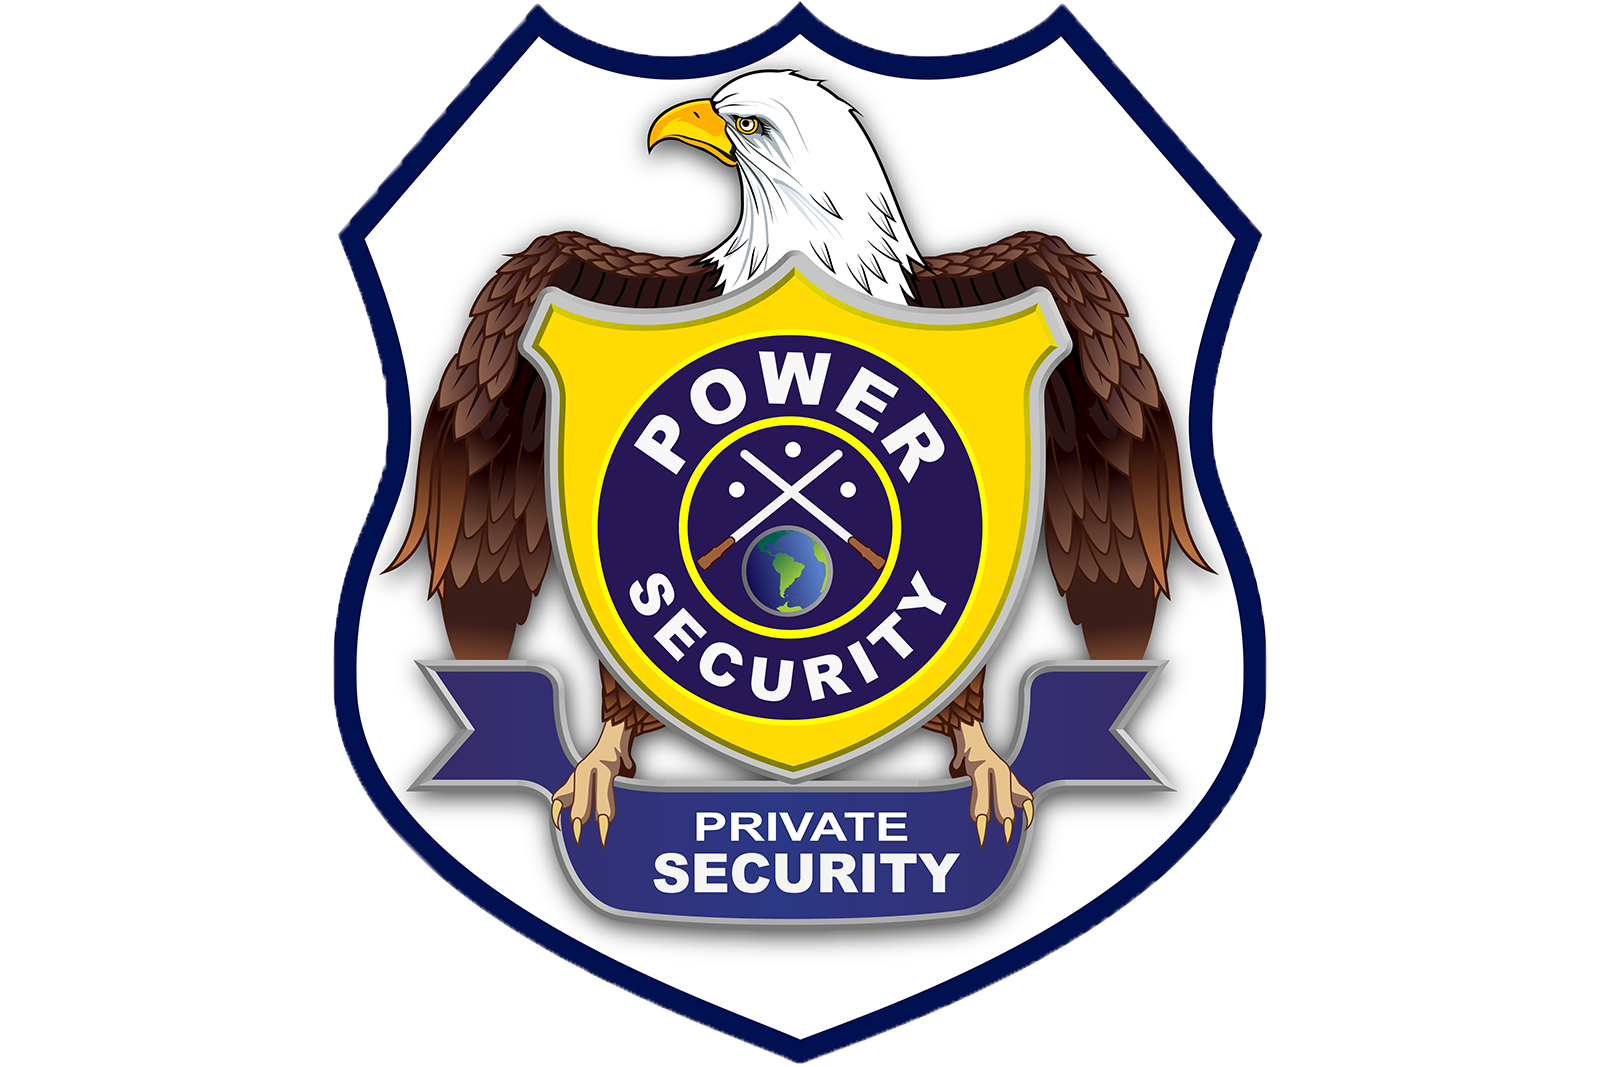 Power Security Group